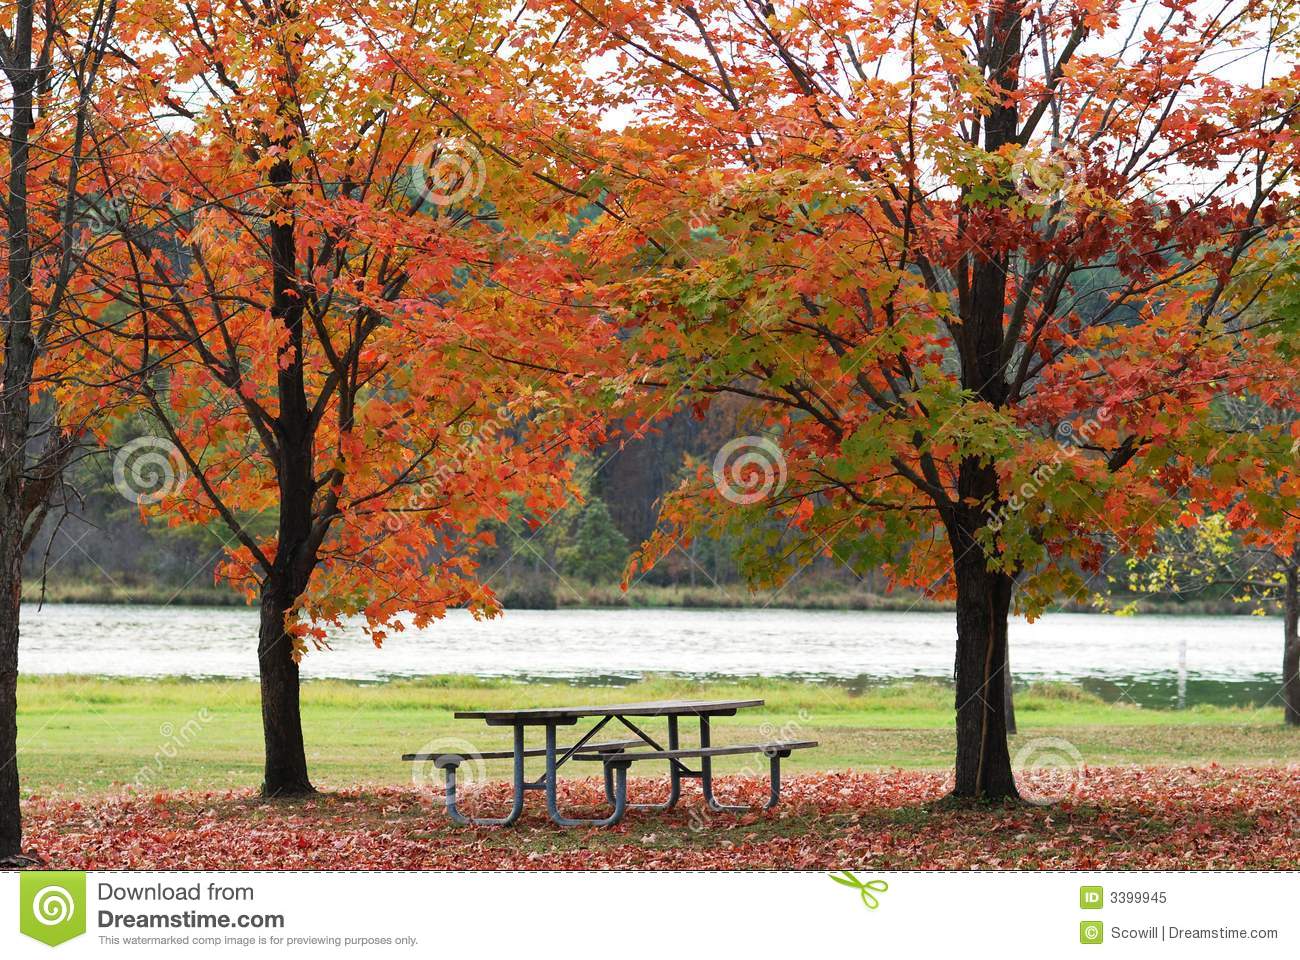 Picnic Table Between Two Trees In Autumn Colors Next To A Lake